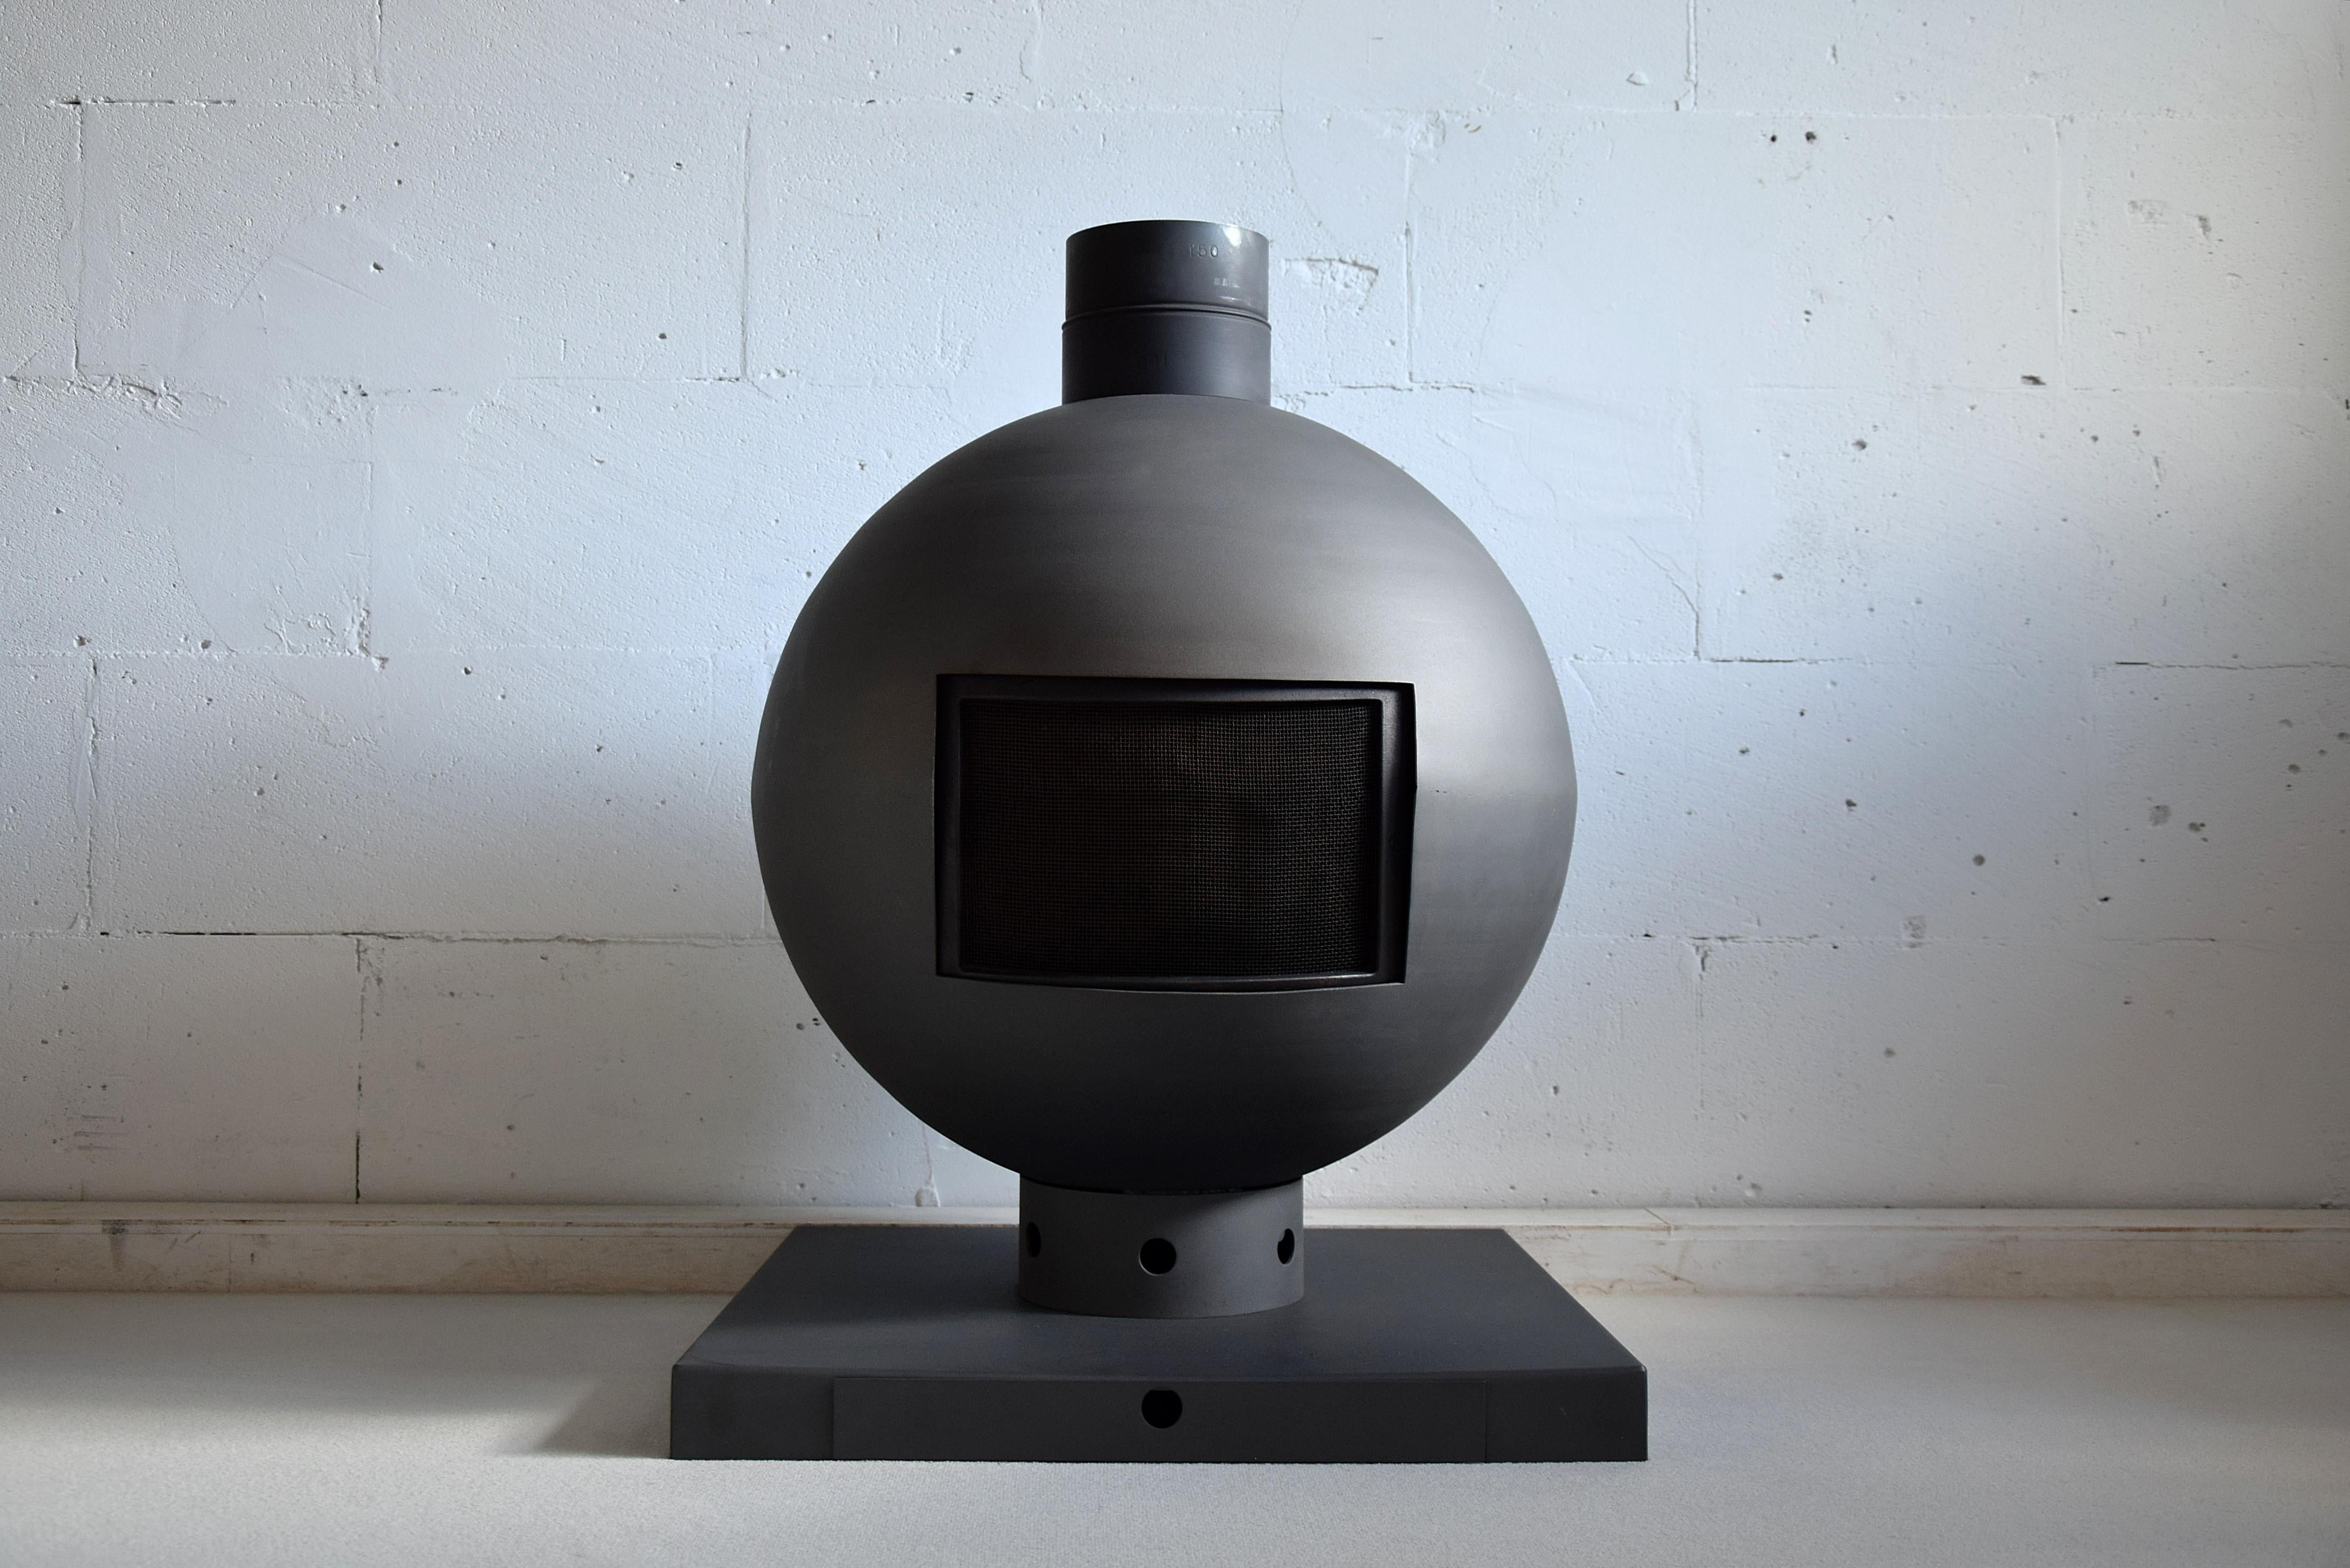 Mid-Century Modern spherical fireplace made out of heavy steel by Dries Kreijkamp , the Netherlands, 1960s. This Mid-Century Modern fireplace can rotate 360 and is provided with a sliding door making sure no coals or wood can fall out. The fireplace